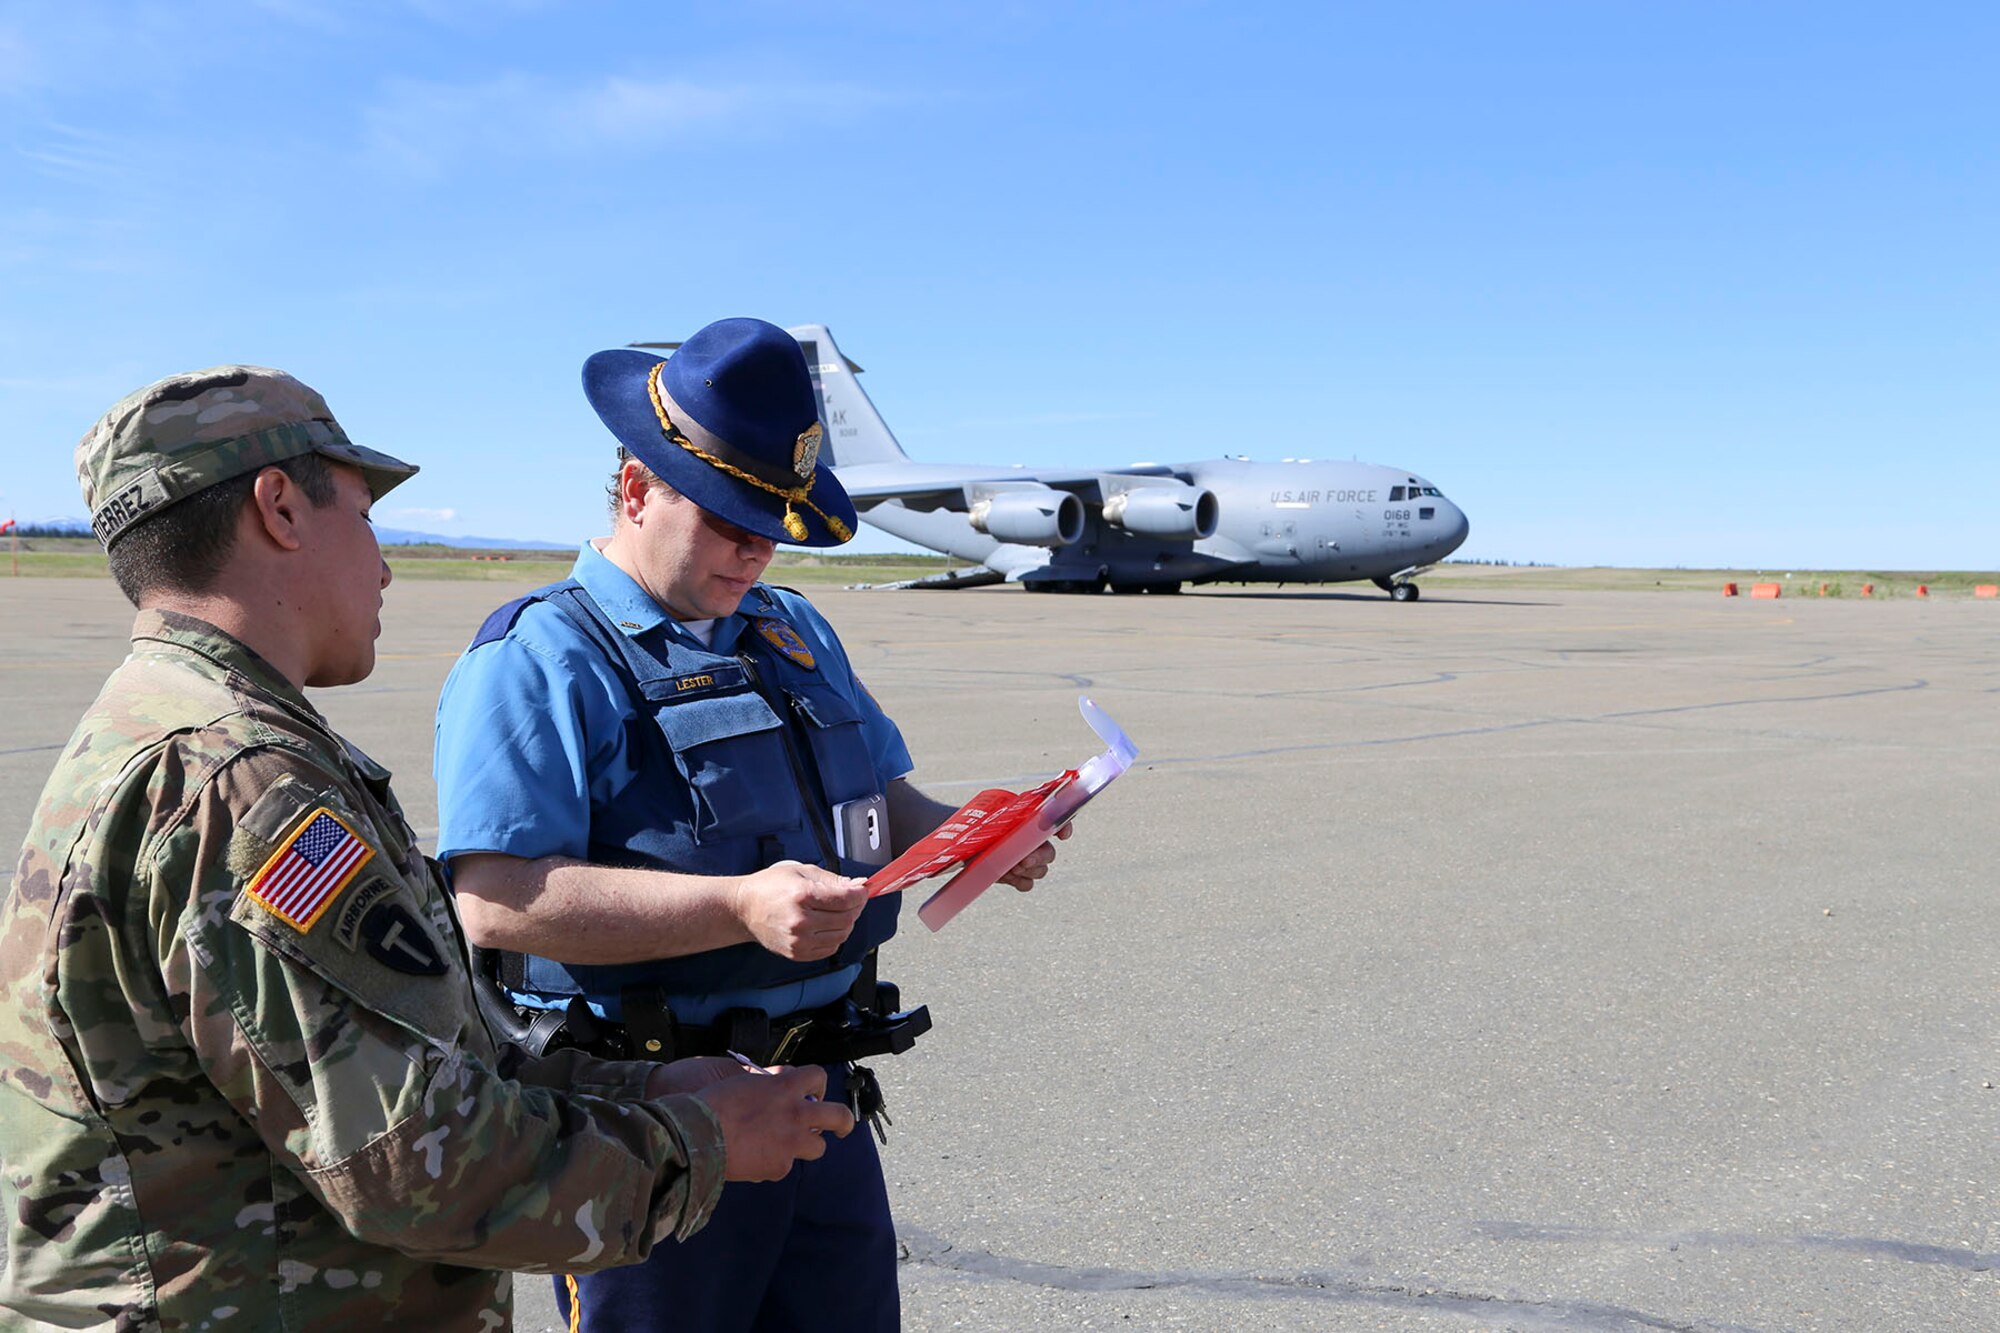 Alaska National Guard Sgt. Elijah Gutierrez, a civil operator with the Counterdrug Support Program, discusses the procedures for using the Narcan kit with Alaska State Trooper James Lester at the Edward G. Pitka Sr. Airport in Galena, Alaska, May 31, 2017. Twelve Guardsmen from the CDSP traveled to the Yukon-Koyukuk Region hub to deliver the kits that block the effects of opioids and reverses an overdose, and to provide drug and alcohol education and prevention materials to local residents. (U.S. Army National Guard photo by Staff Sgt. Balinda O’Neal Dresel)